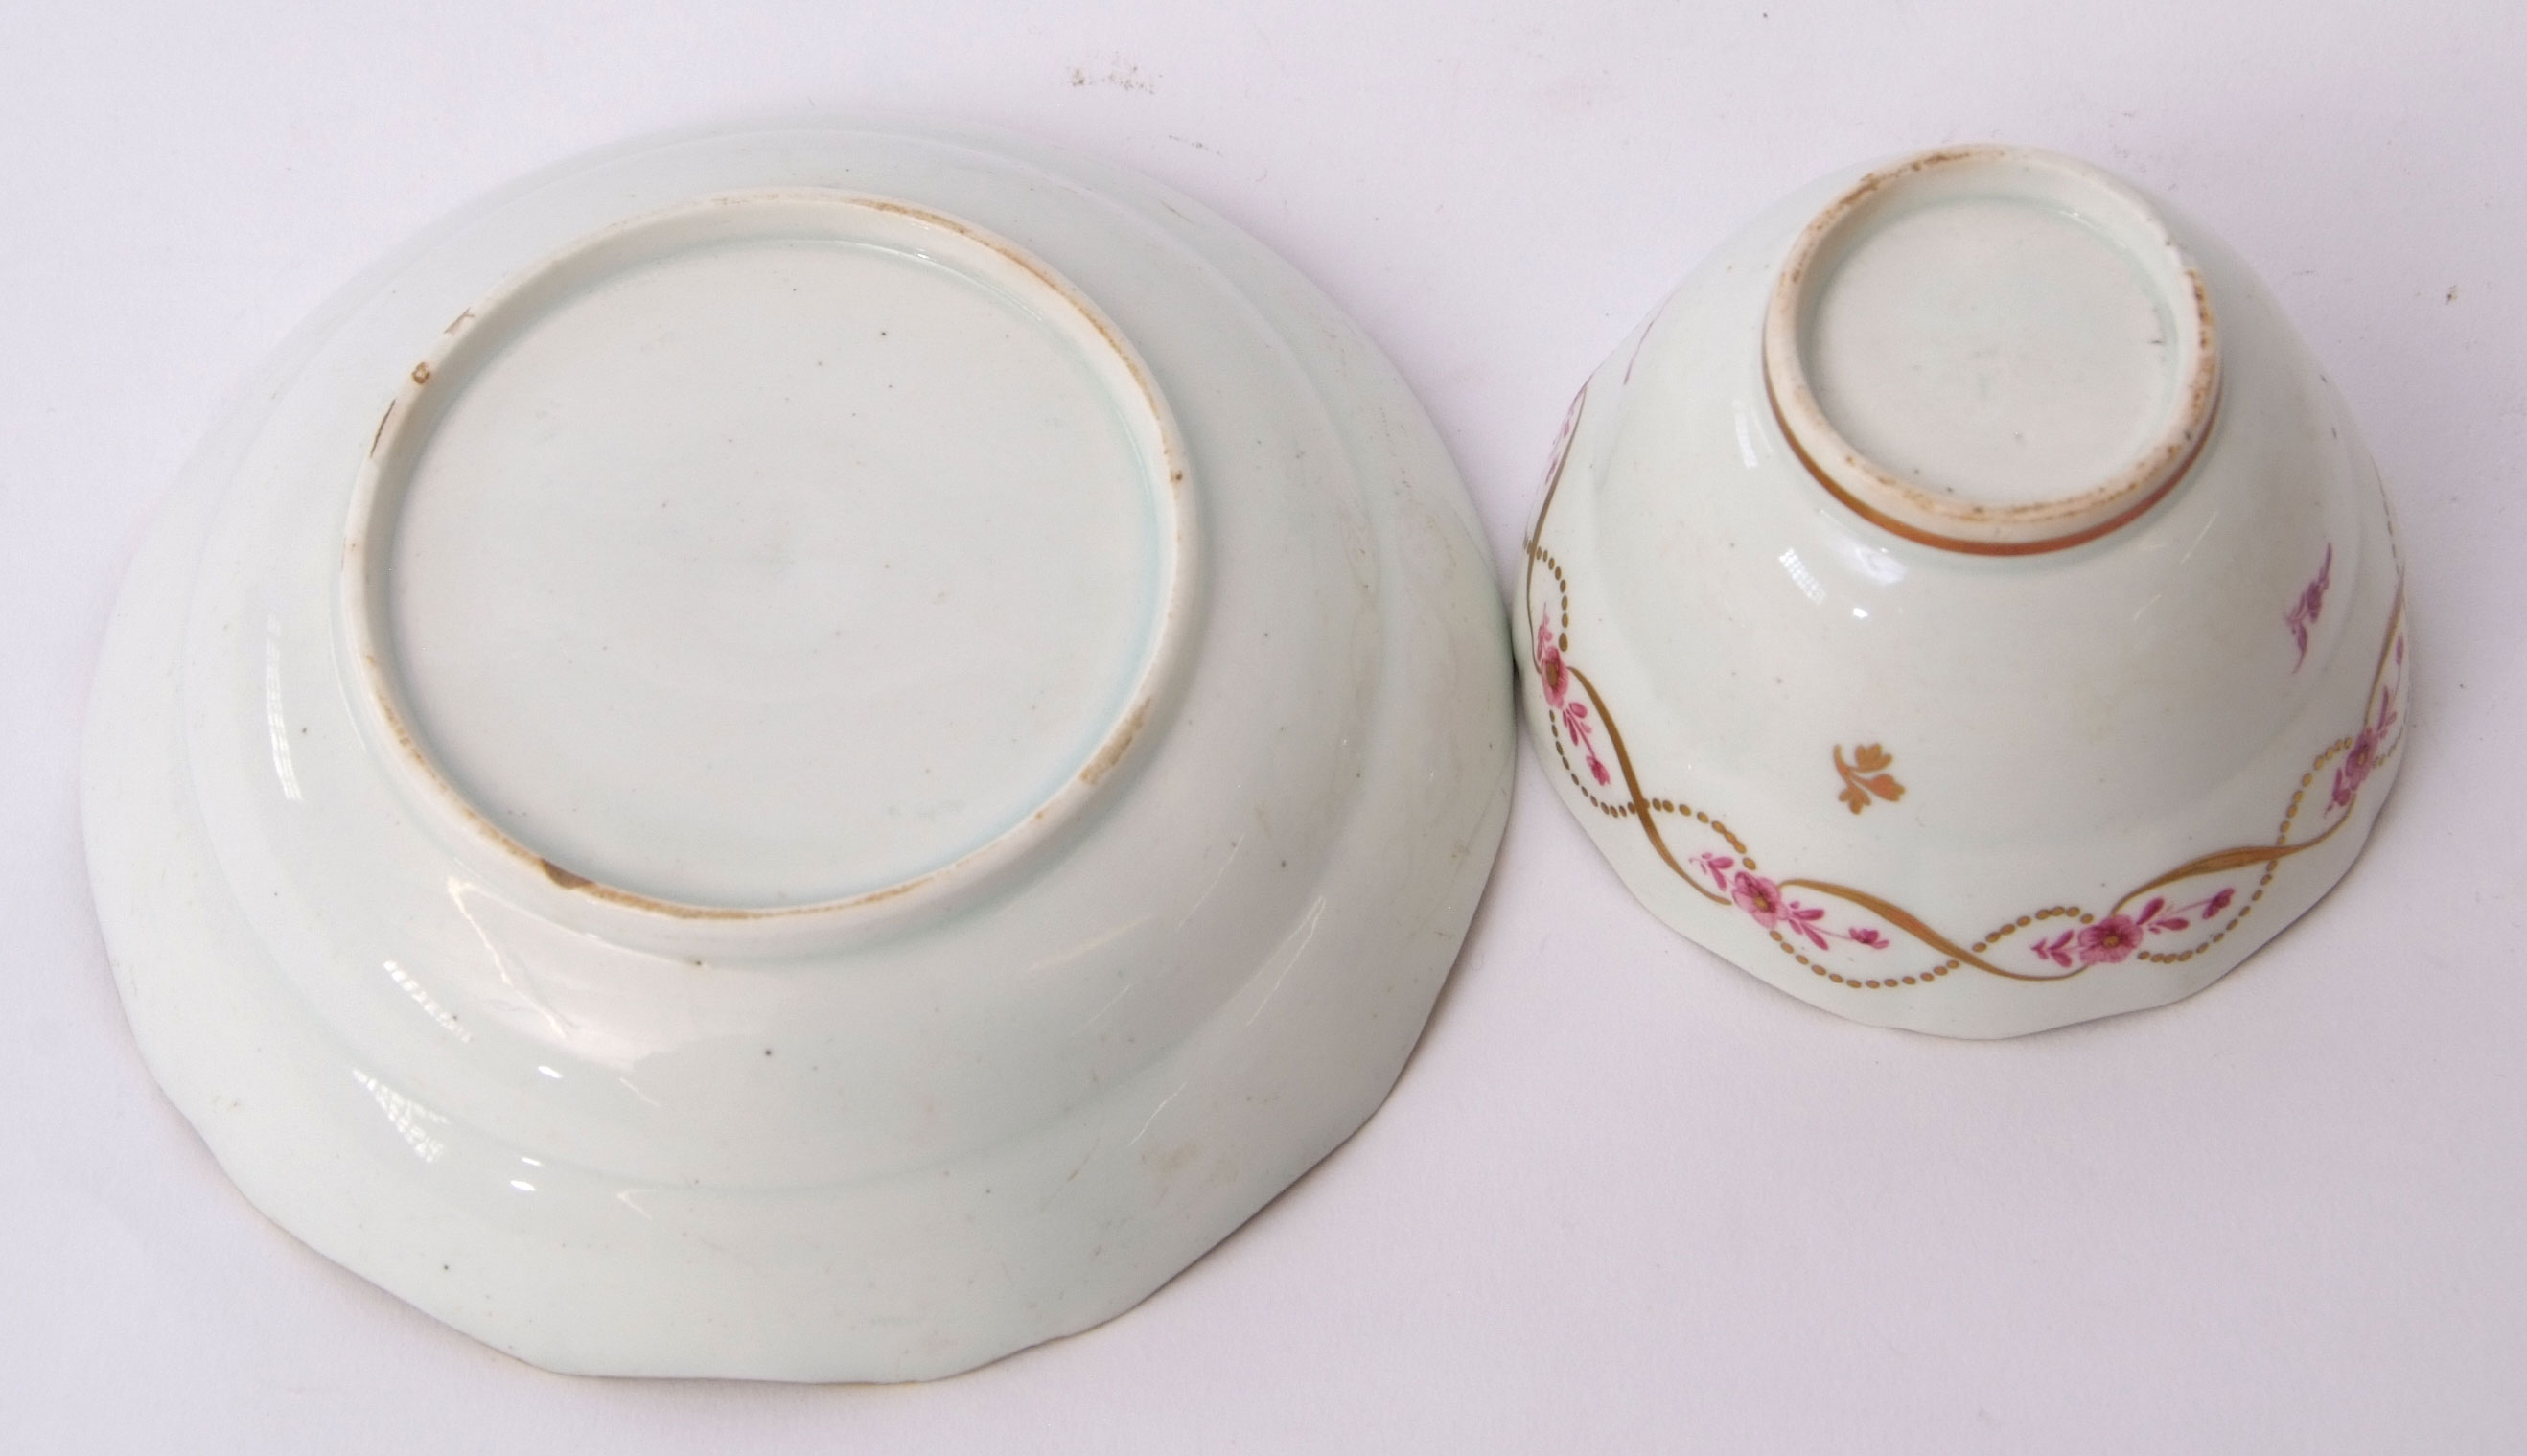 Lowestoft porcelain ogee shaped tea bowl and saucer circa 1790, with gilt and puce design, the - Image 2 of 2